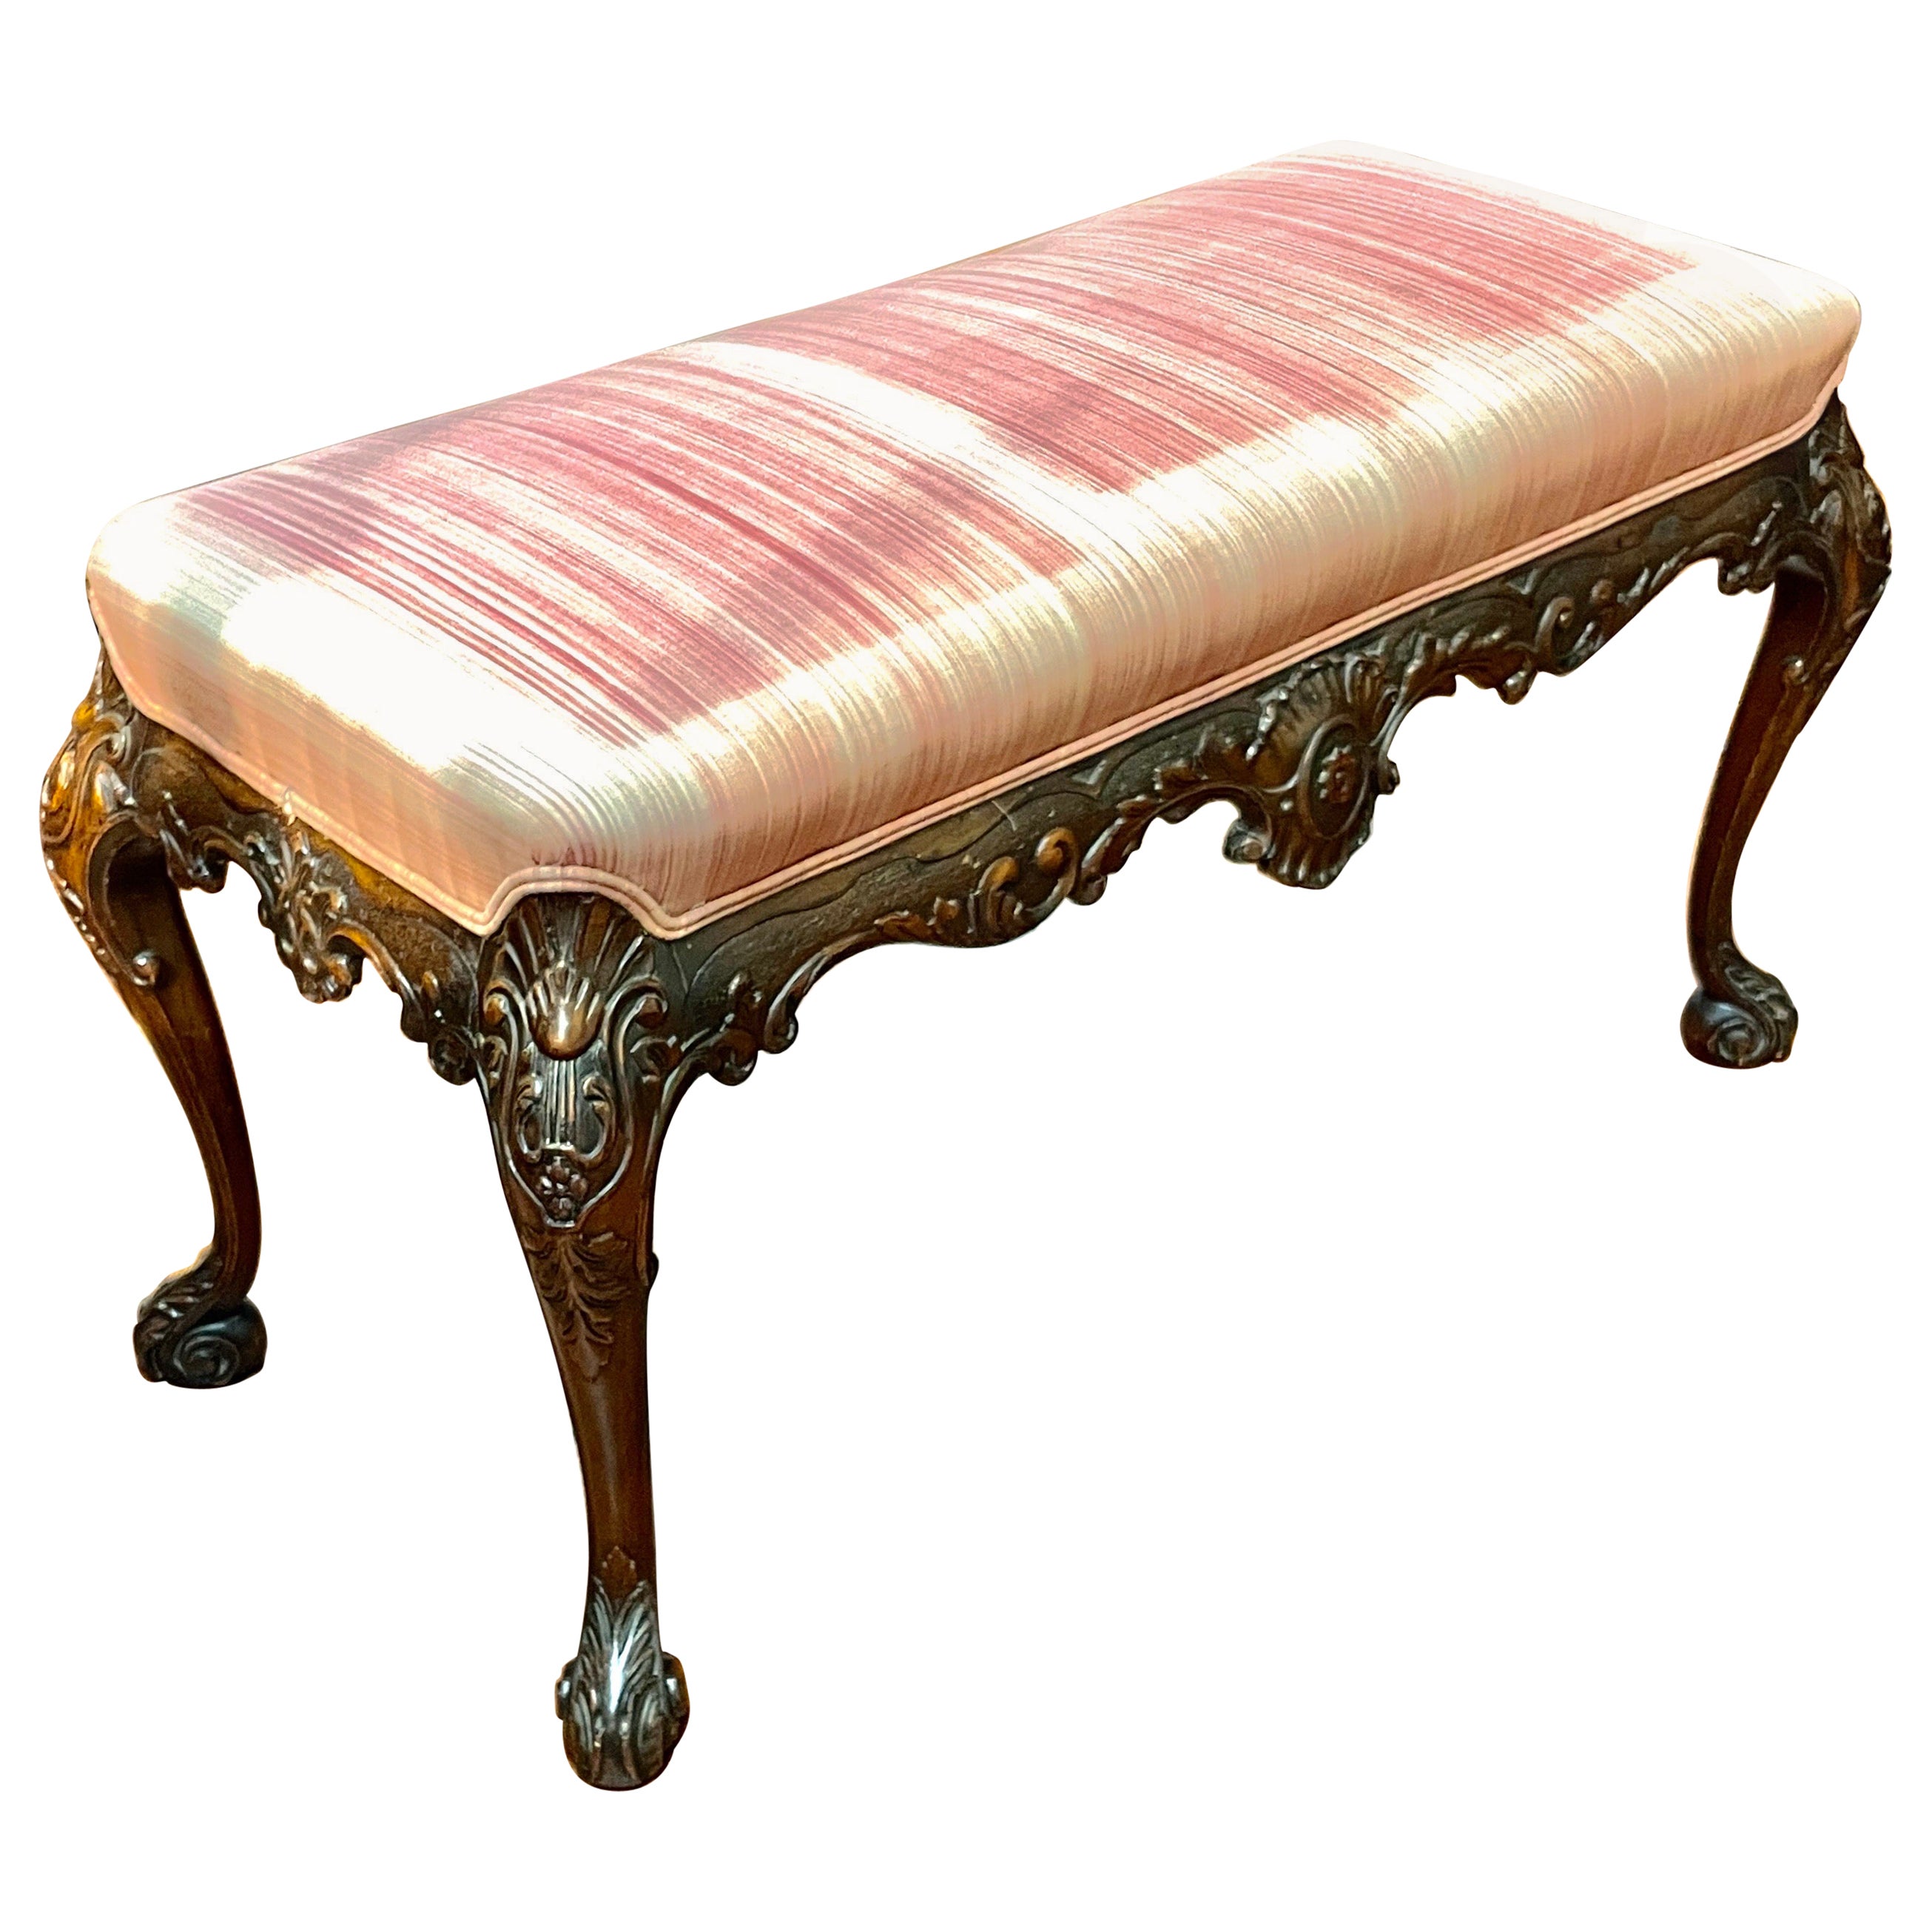 Superb Antique English Geo. Style Carved Mahogany Bedside or Fireside Bench For Sale